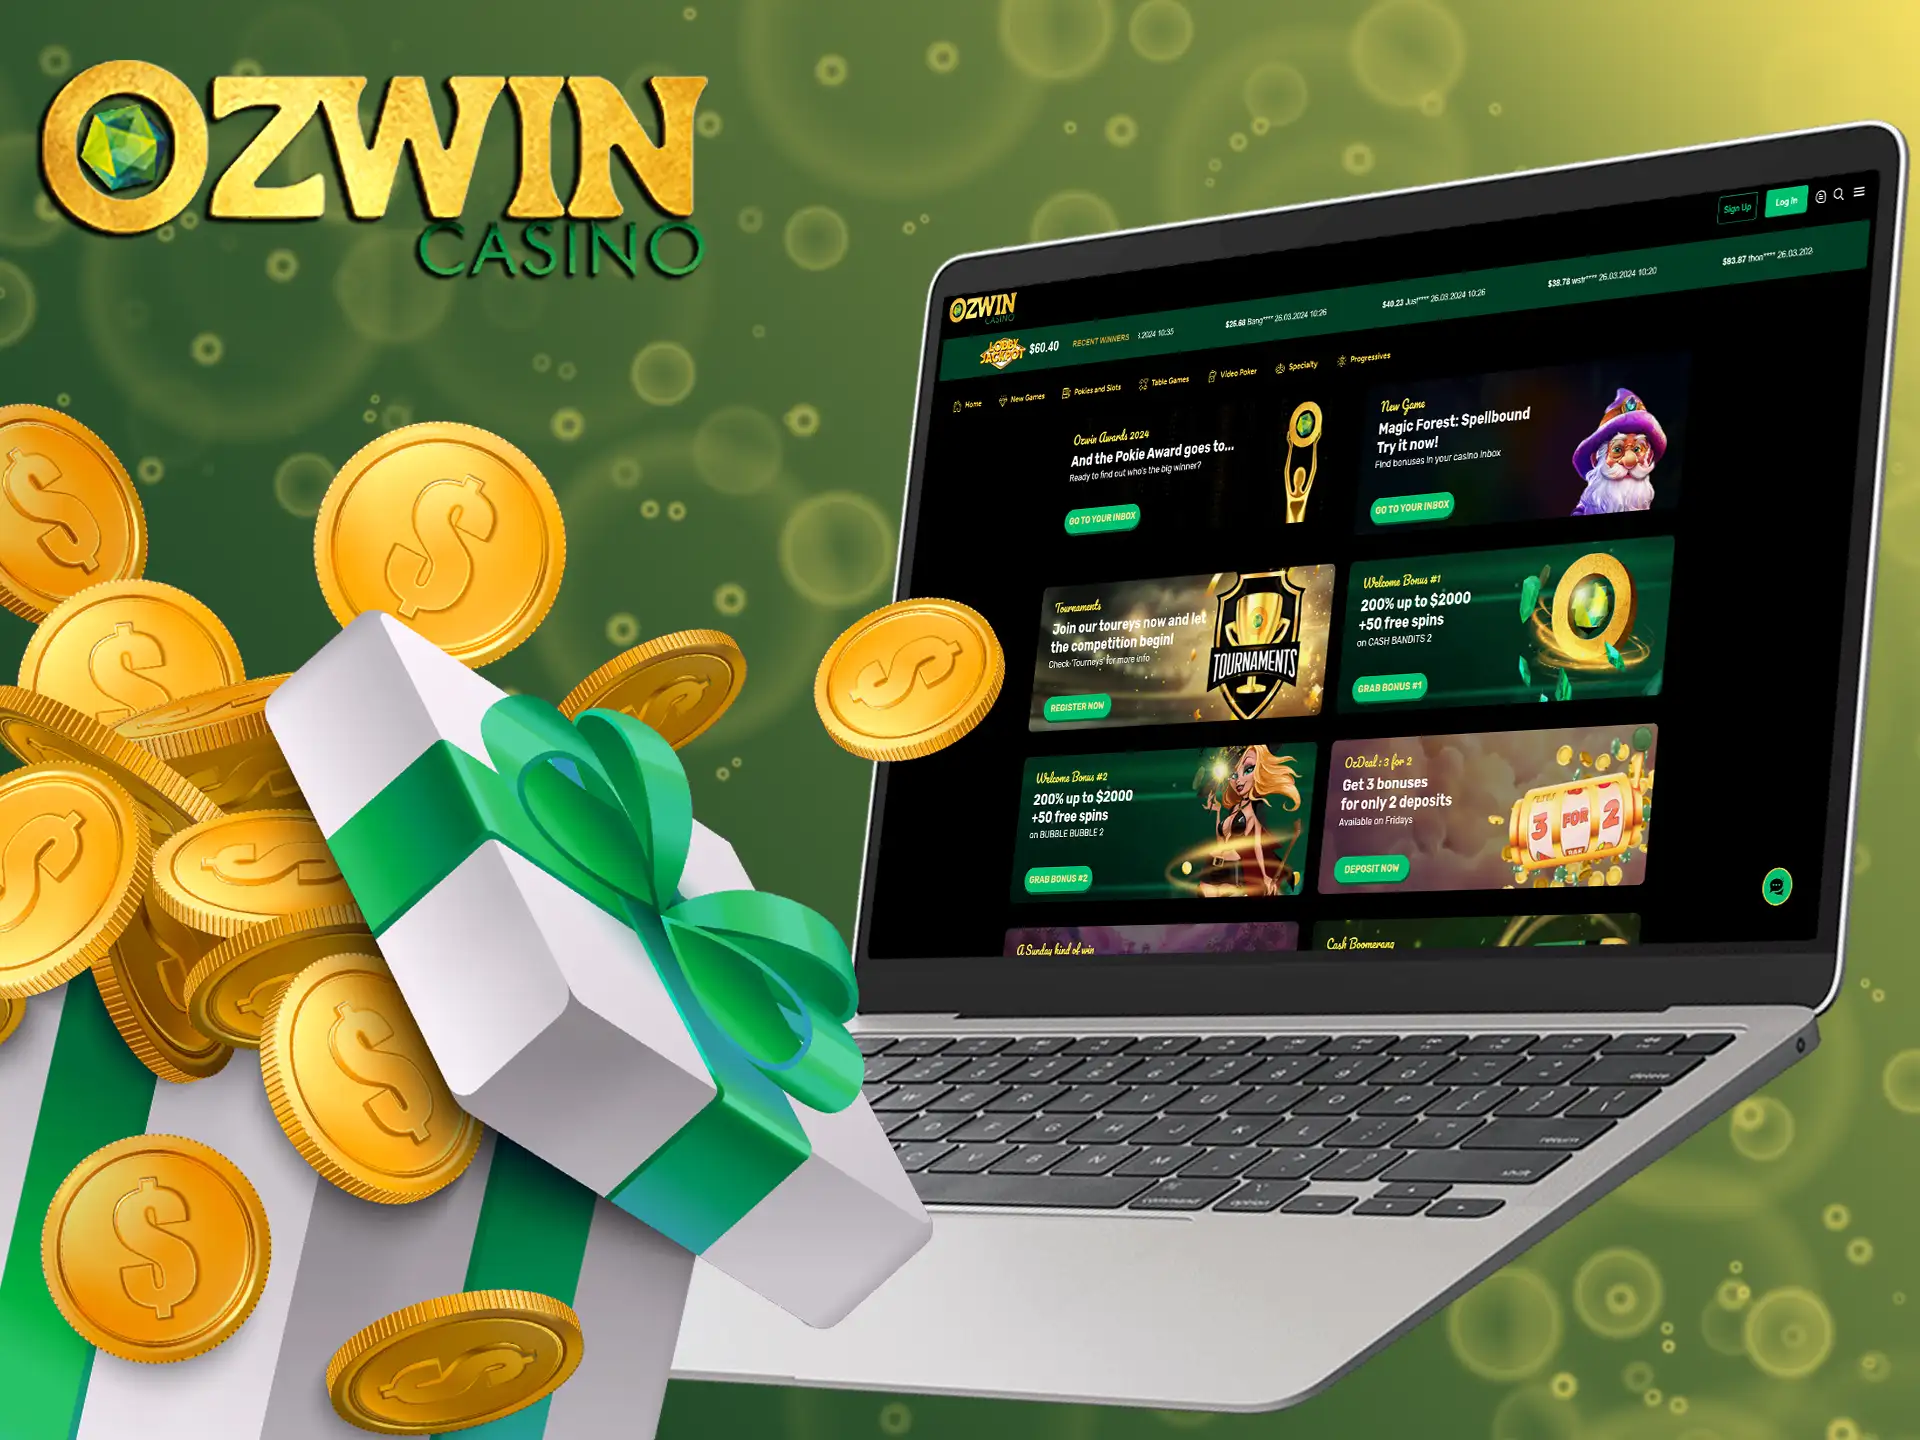 At Ozwin Casino, you can boost your winnings with their guaranteed bonus!